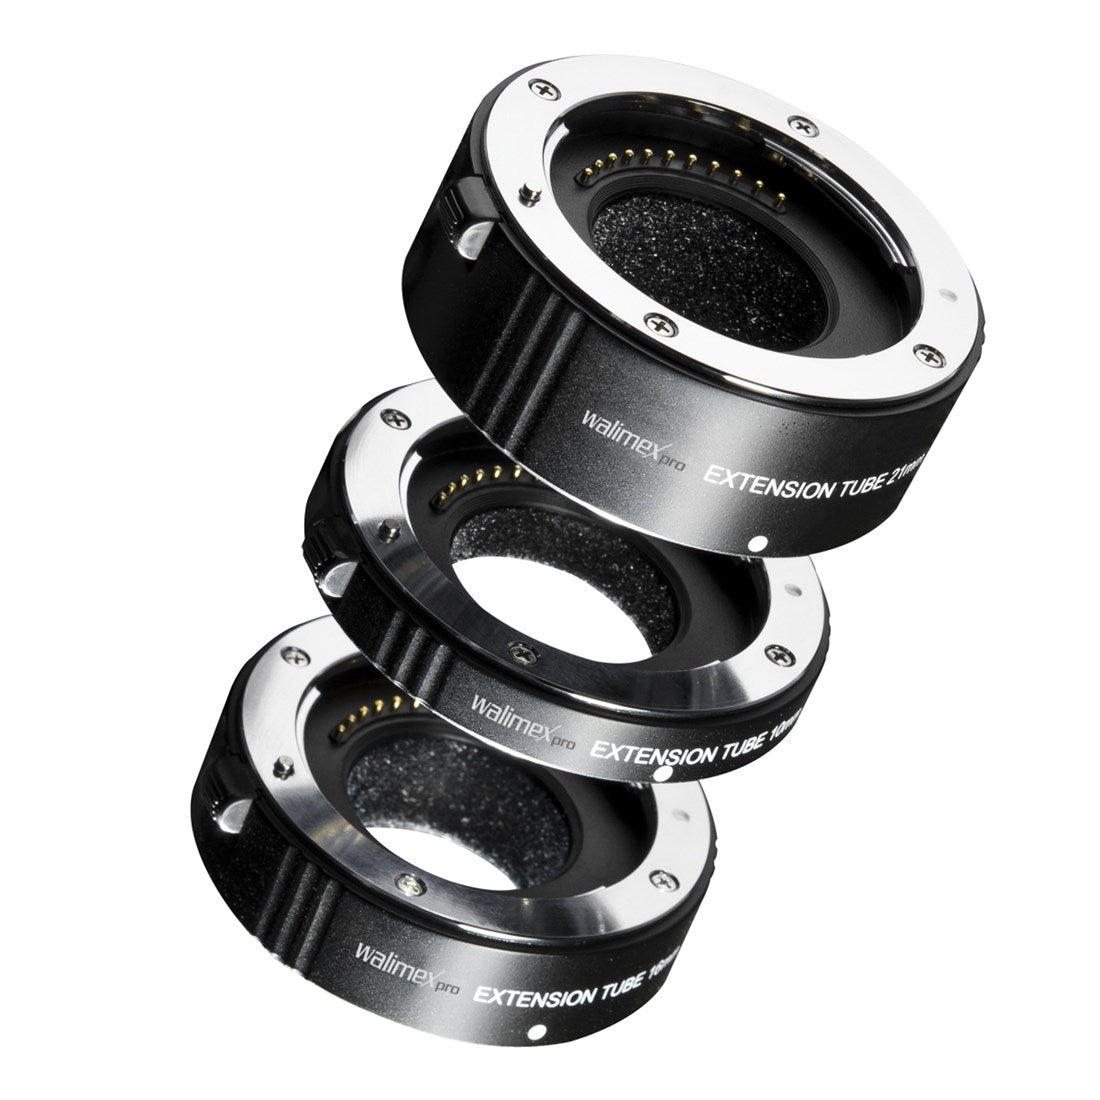 Product Image of Walimex Pro Automatic-Spacer Set For Fuji X